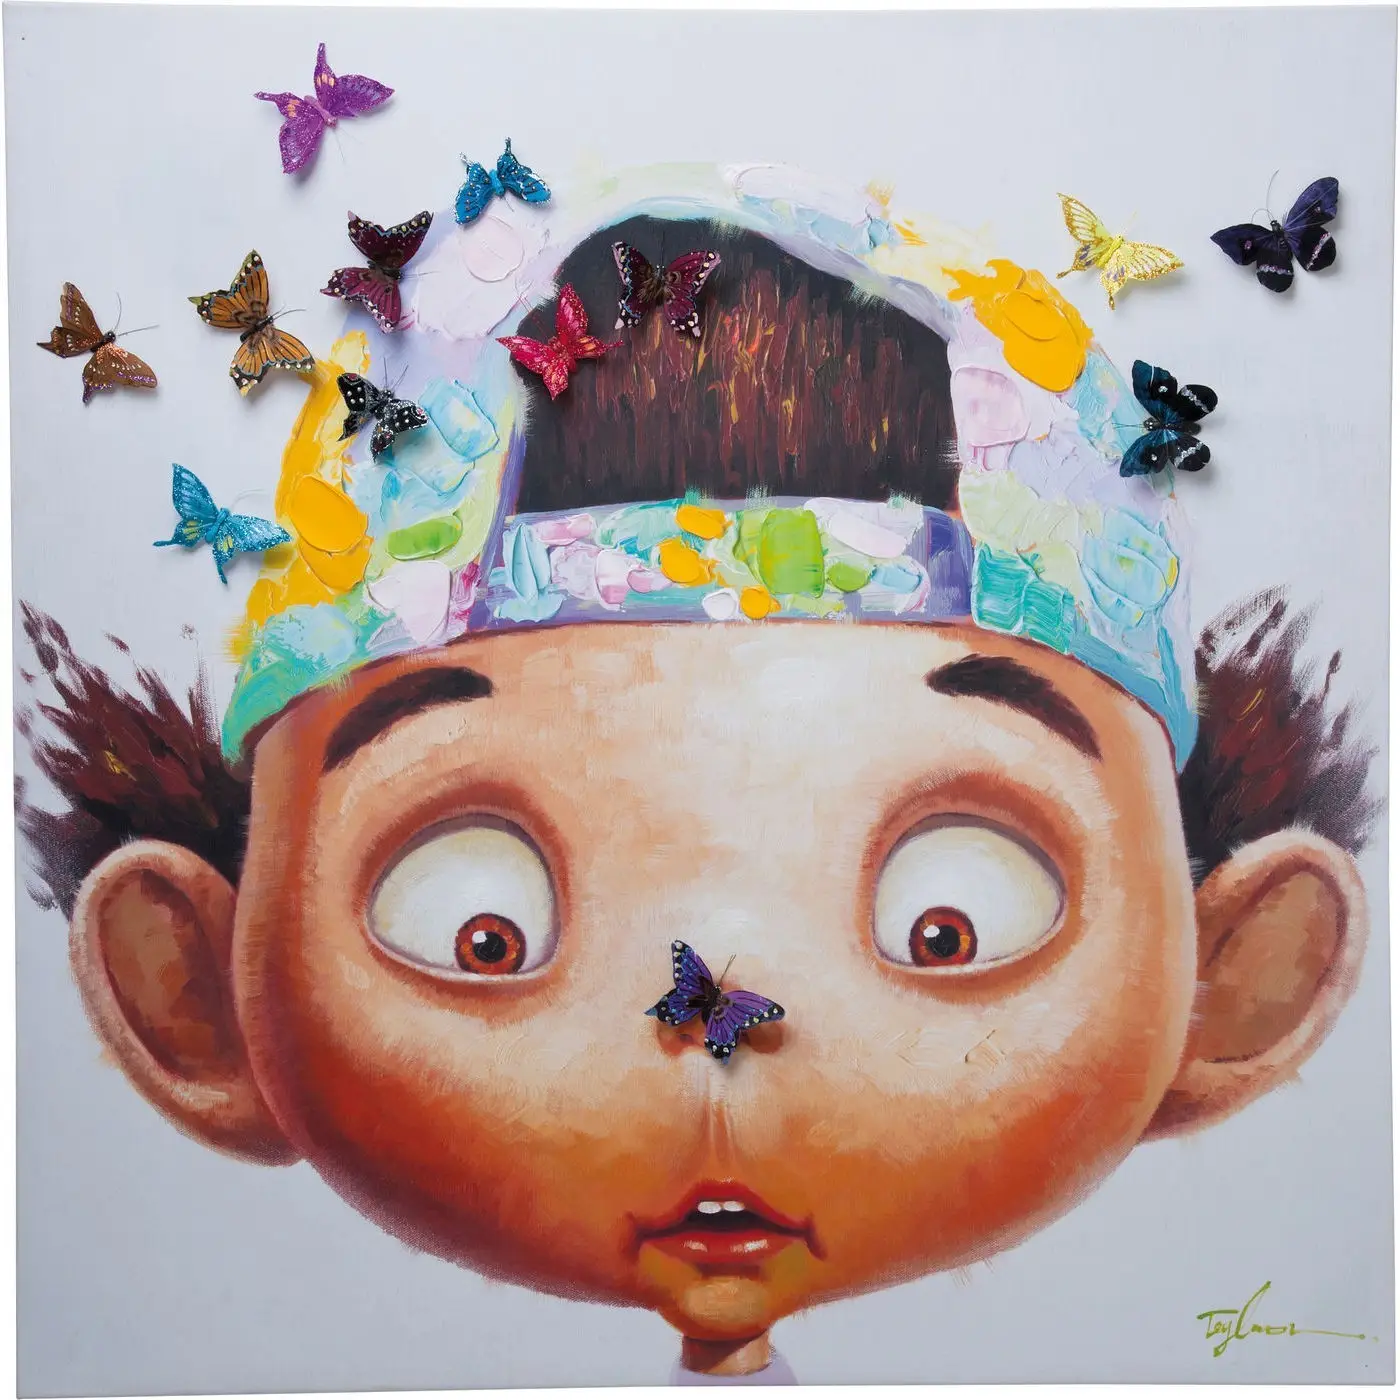 Boy Bild with Touched Butterflies